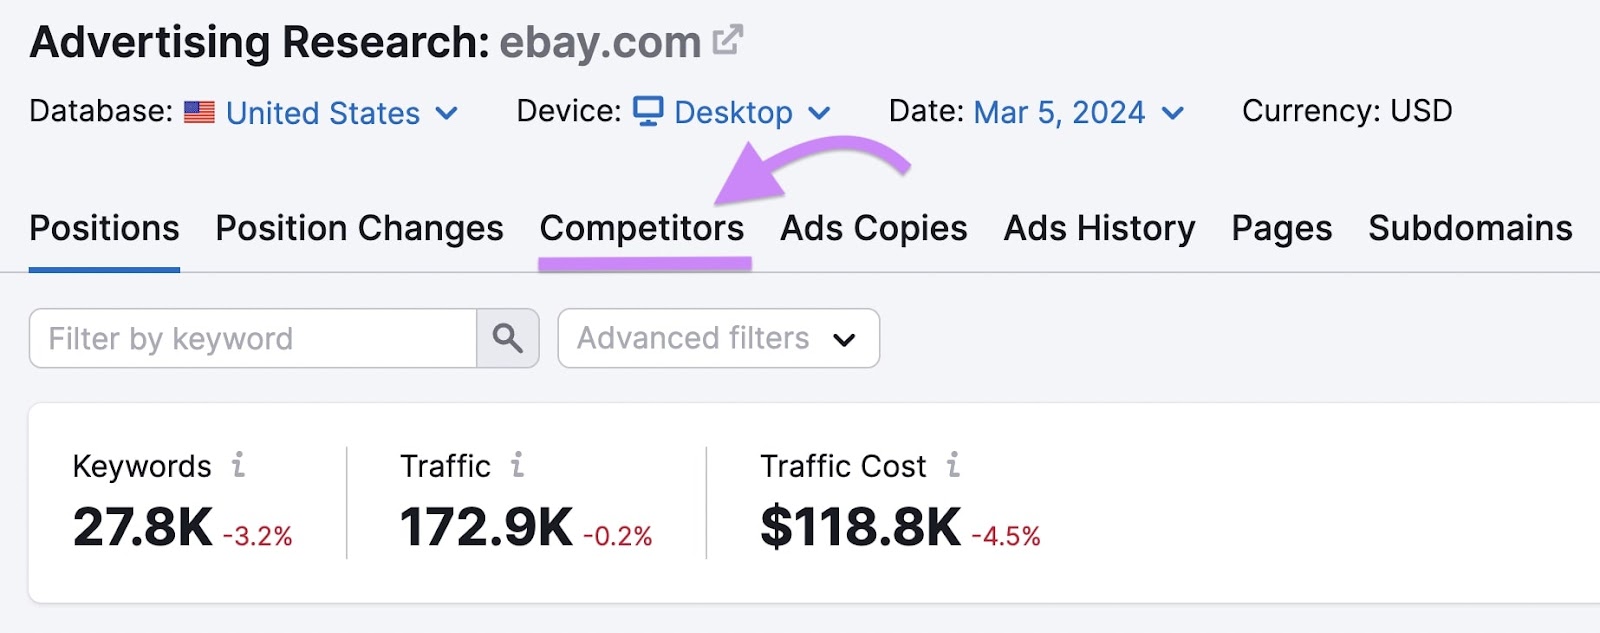 "Competitors" tab highlighted in the Advertising Research tool